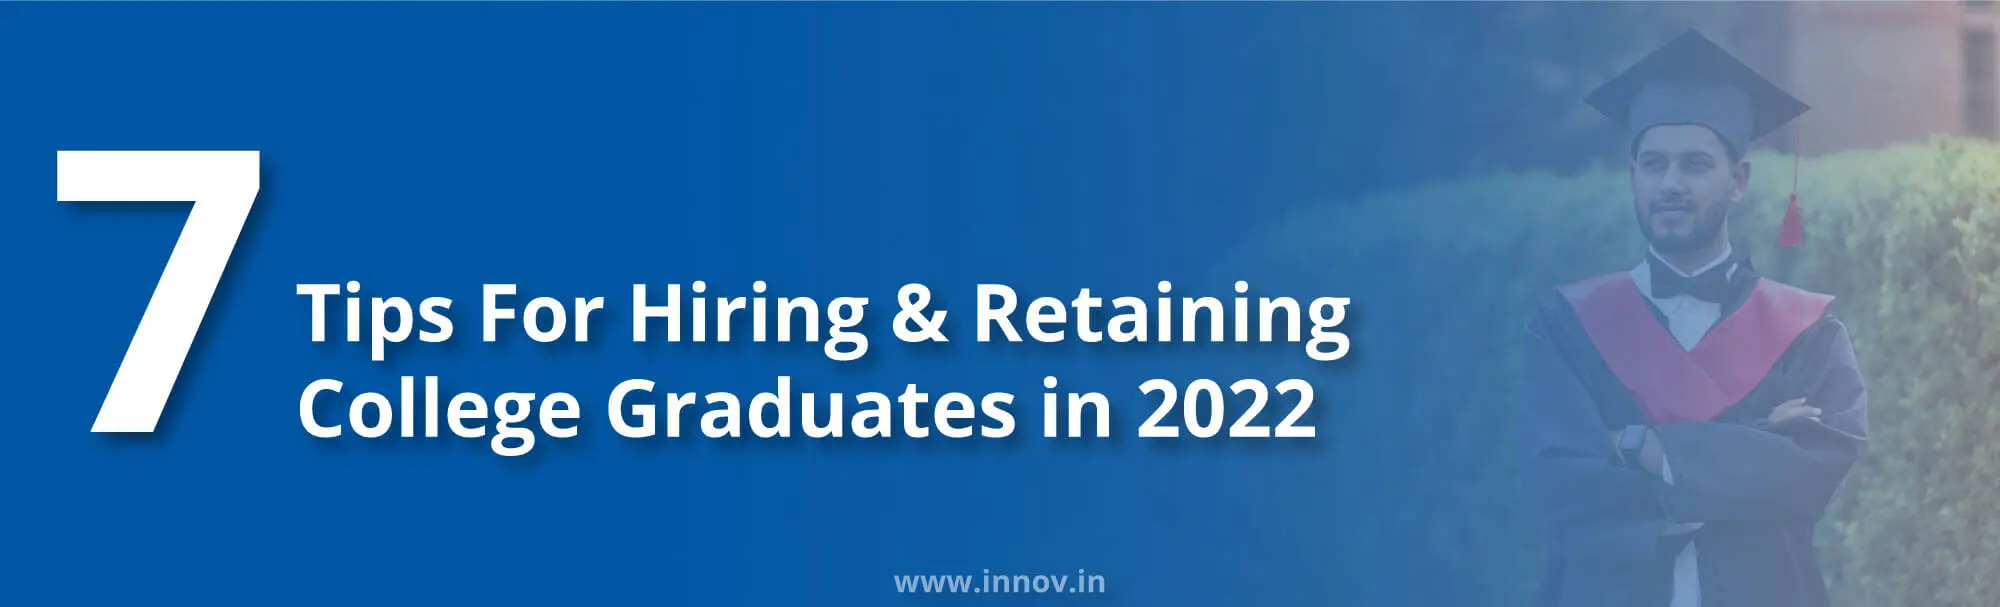 7 tips for hiring and retaining college graduates in 2022